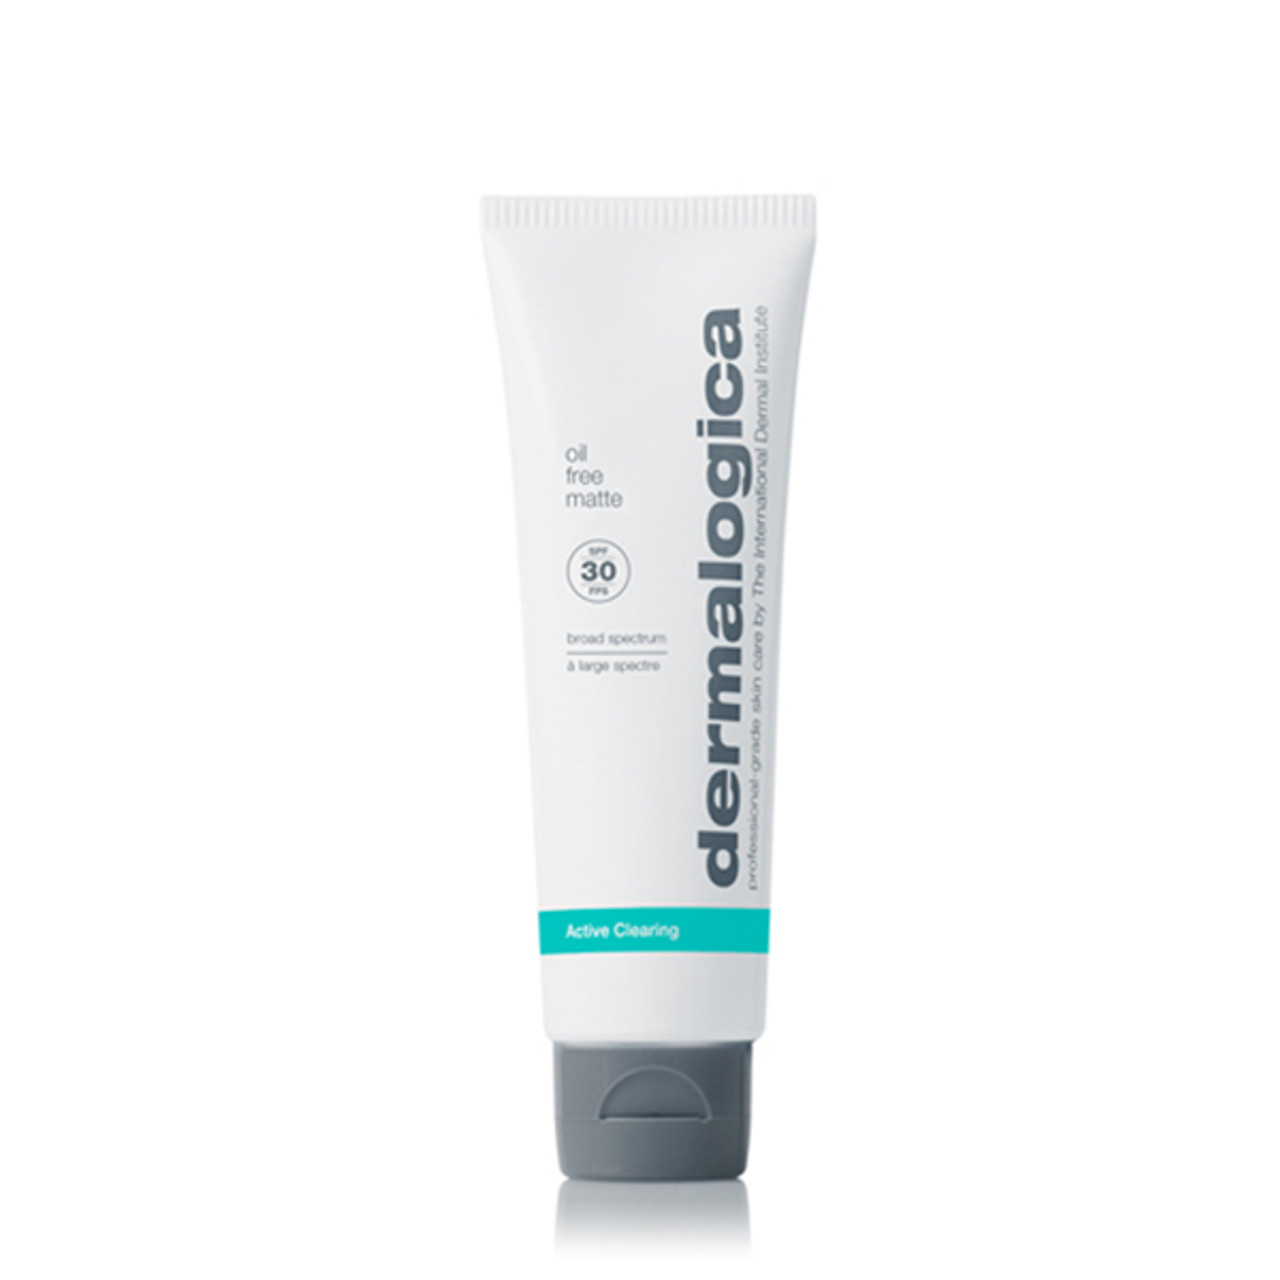 Dermalogica Active Clearing Oil Free Matte SPF 30 - 1.7 oz (111343)